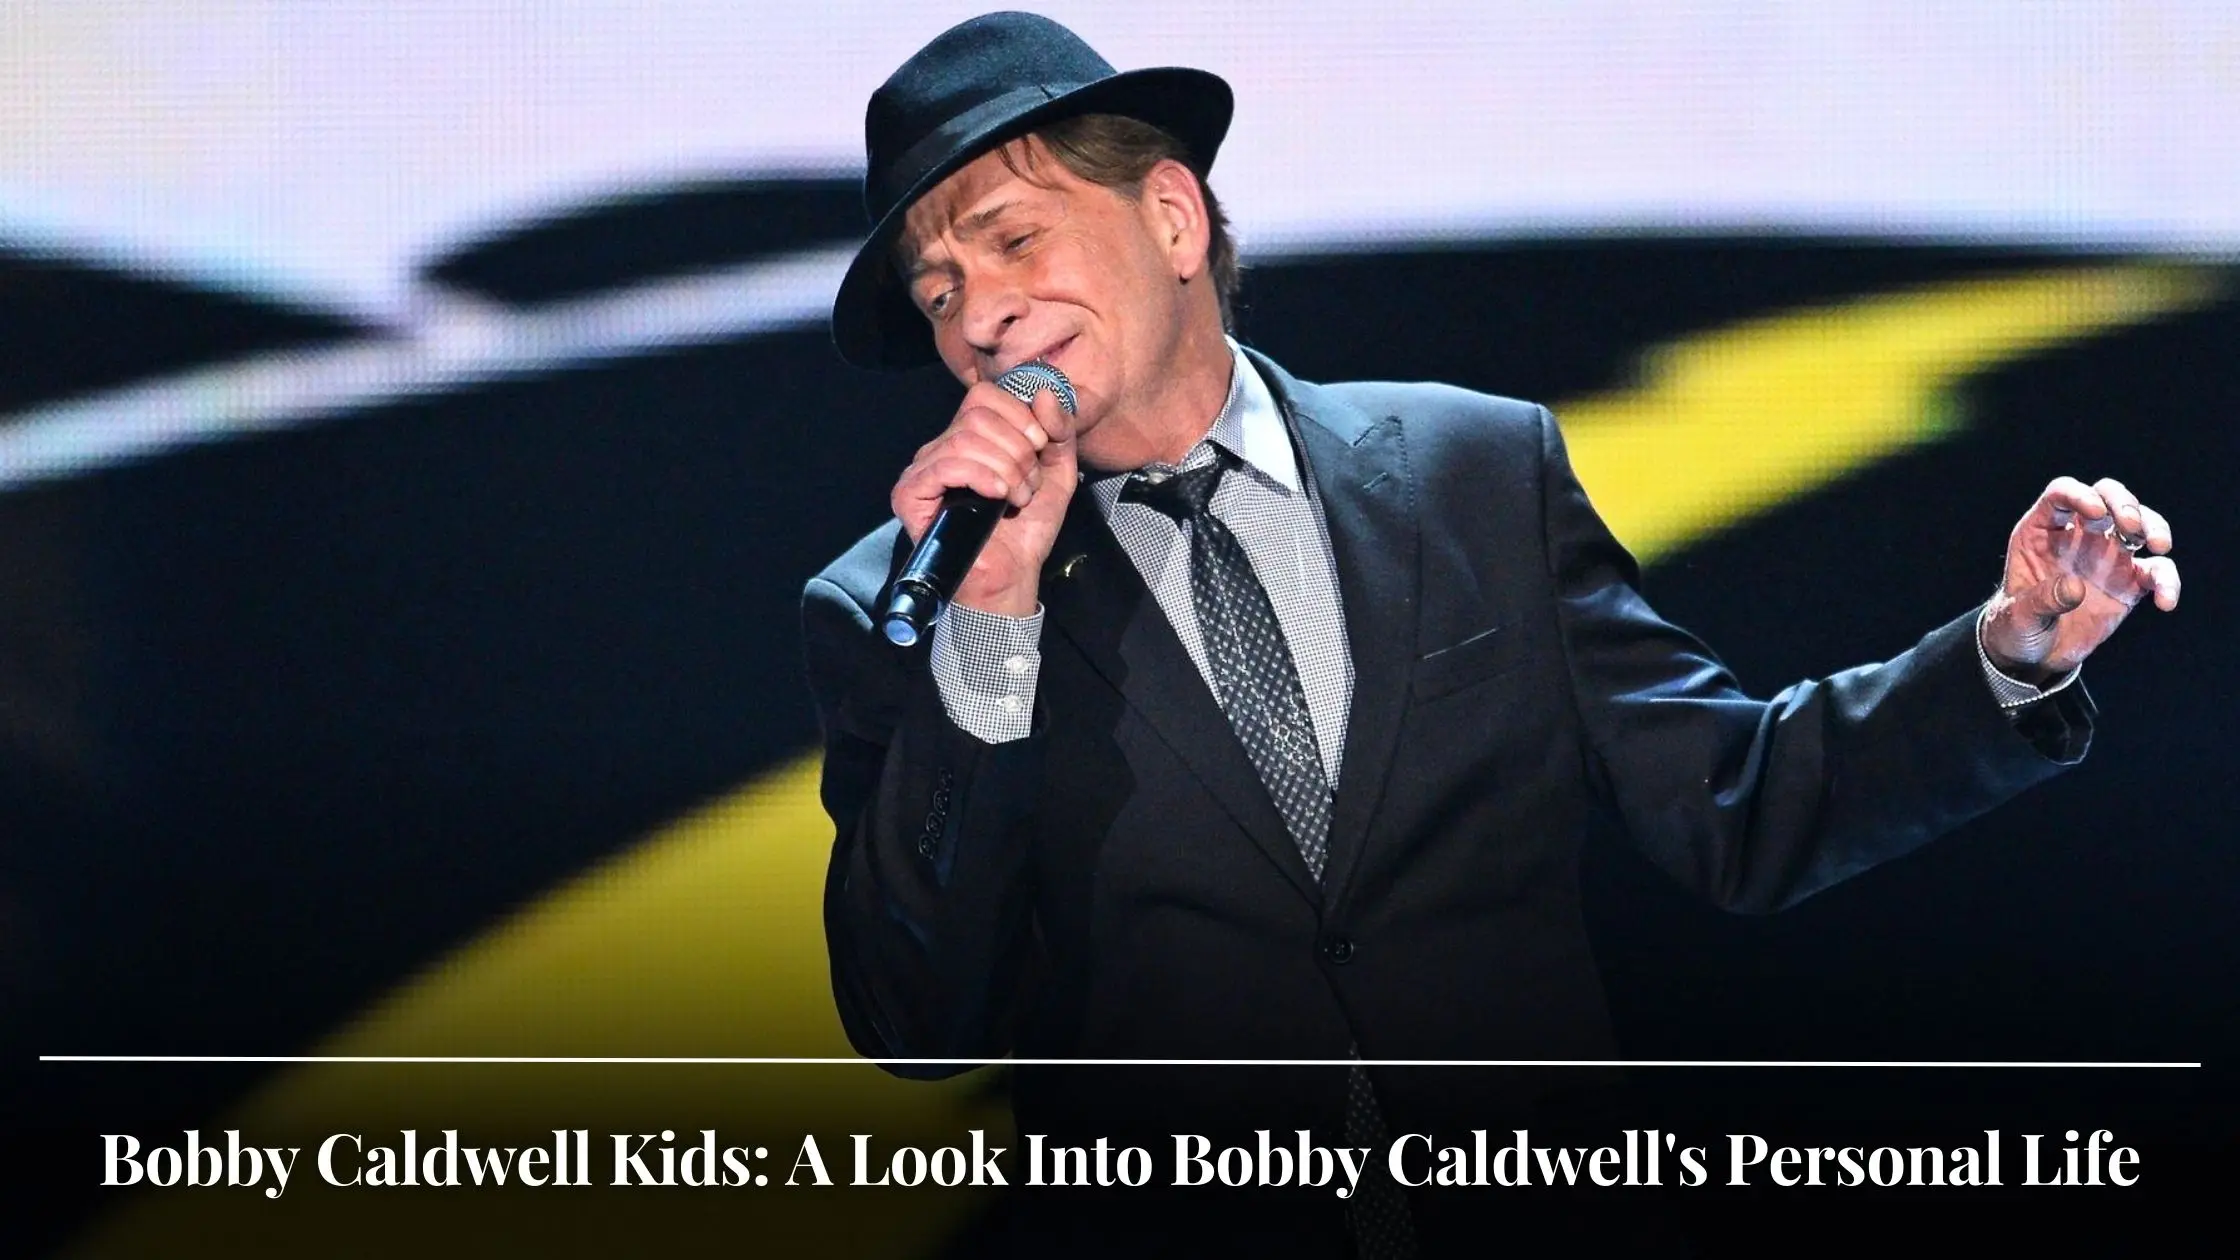 Bobby Caldwell Kids A Look Into Bobby Caldwell's Personal Life